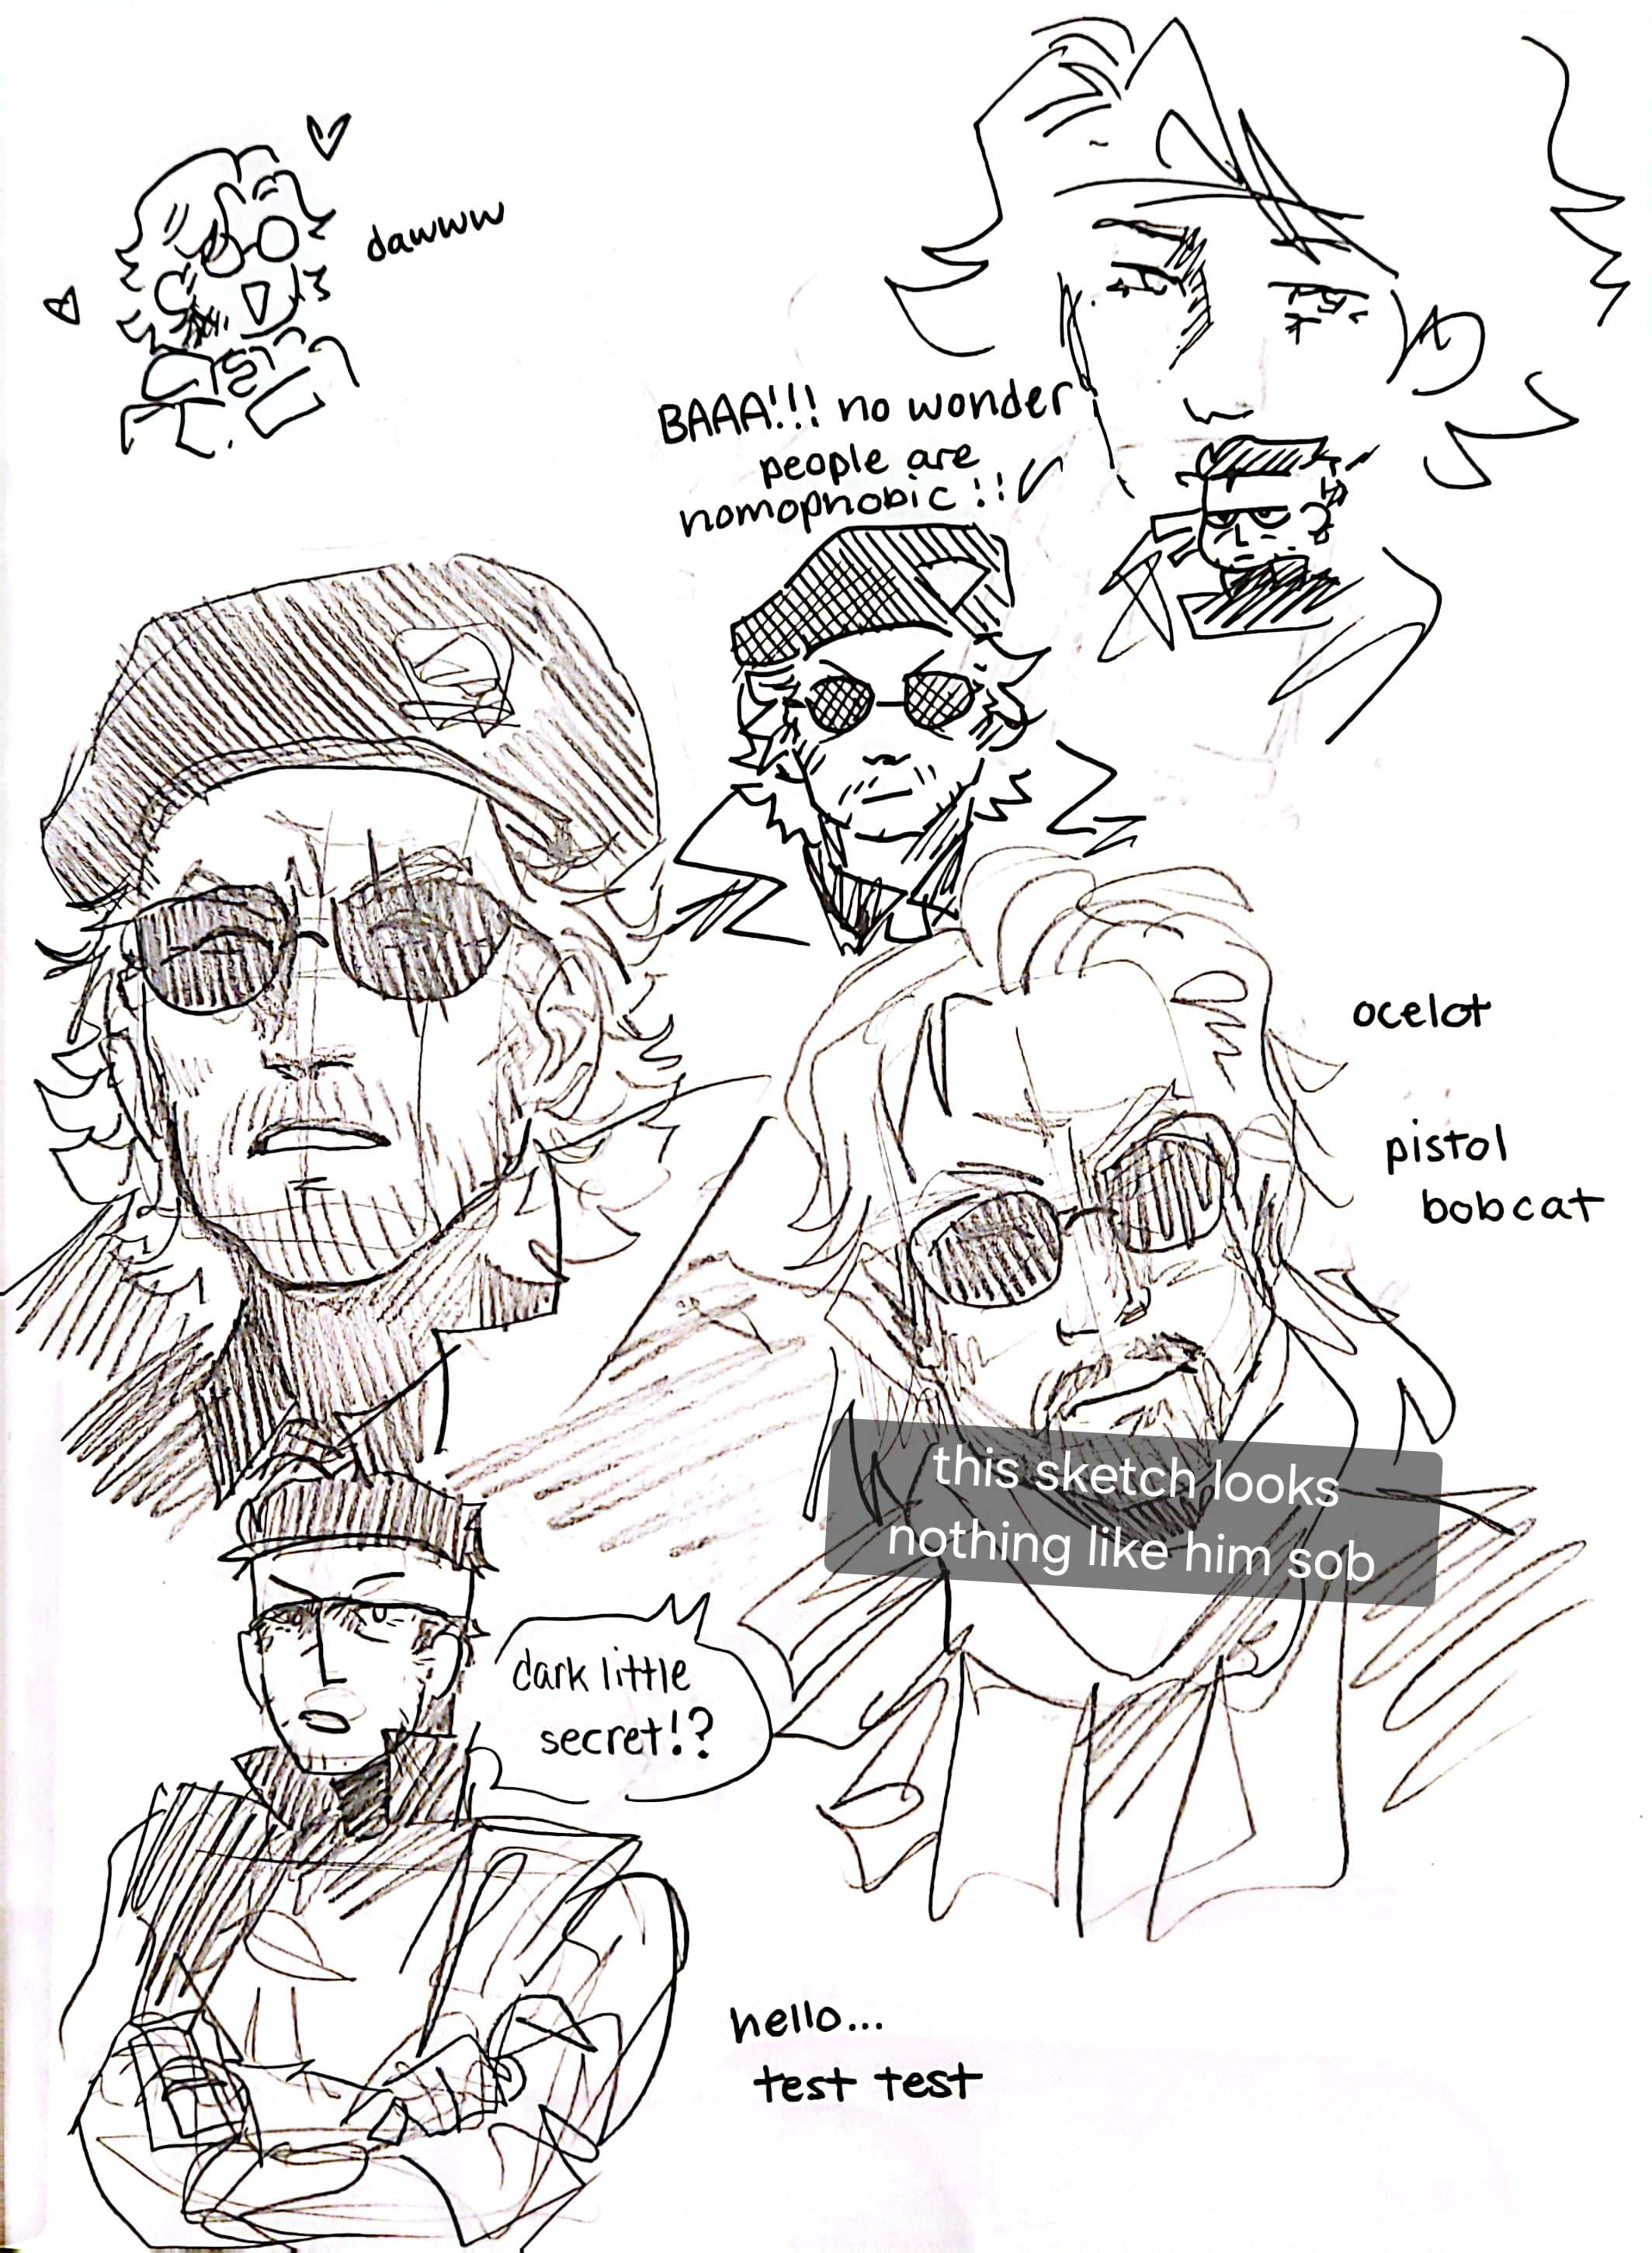 A page full of doodles, from the top to bottom, left to right: a tiny sketch of Otacon with hearts that says 'dawww'; A rough sketch of Meryl with a teensy chibi Snake in front of her; A sketch of TPP Kaz captioned 'BAAA!!! no wonder people are homophobic!!'; A portrait of TPP Kaz; A portrait of TPP Ocelot with text covering most of it that says 'this sketch looks nothing like him sob'; A doodle of MGS1 Solid Snake, he's saying 'dark little secret!?'